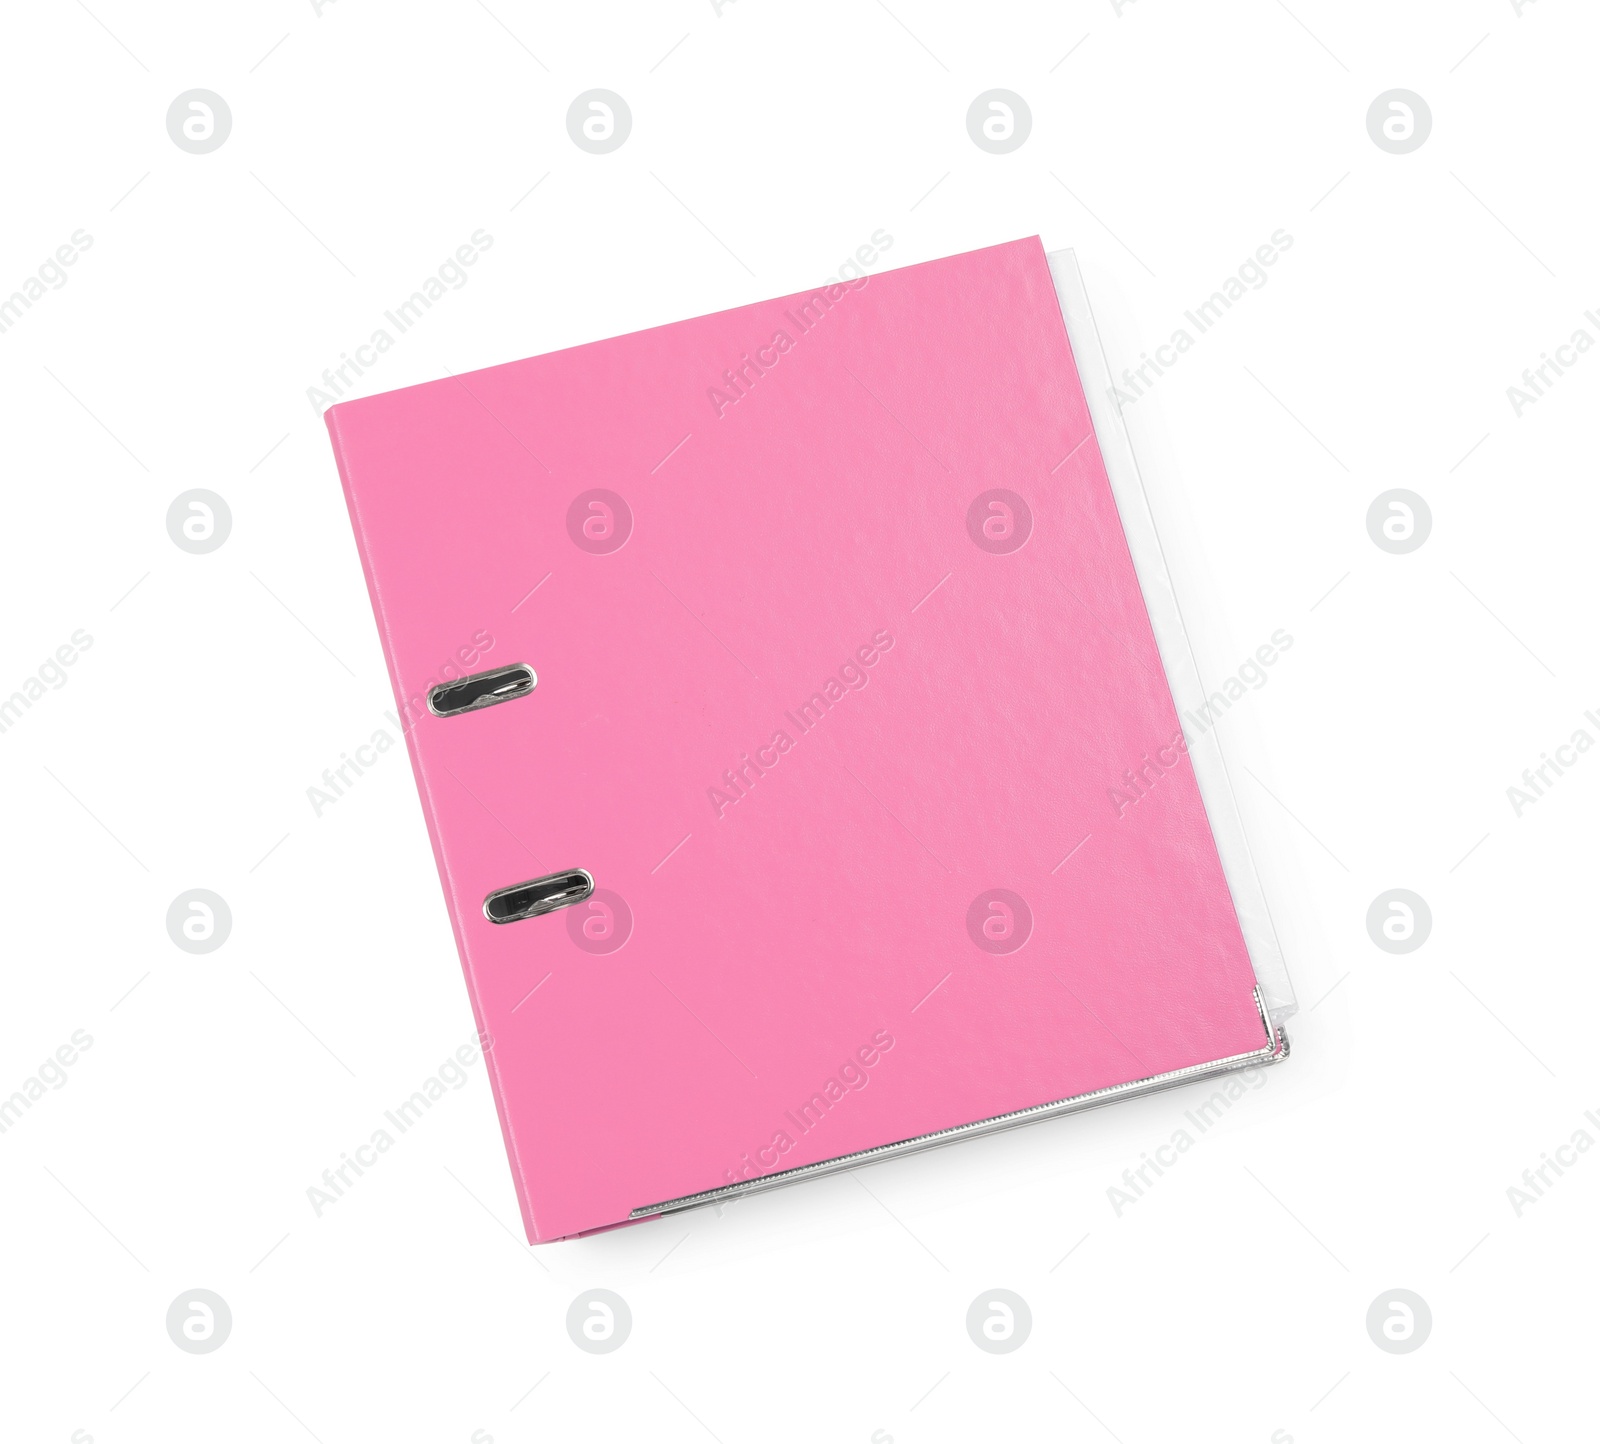 Photo of One pink office folder isolated on white, top view